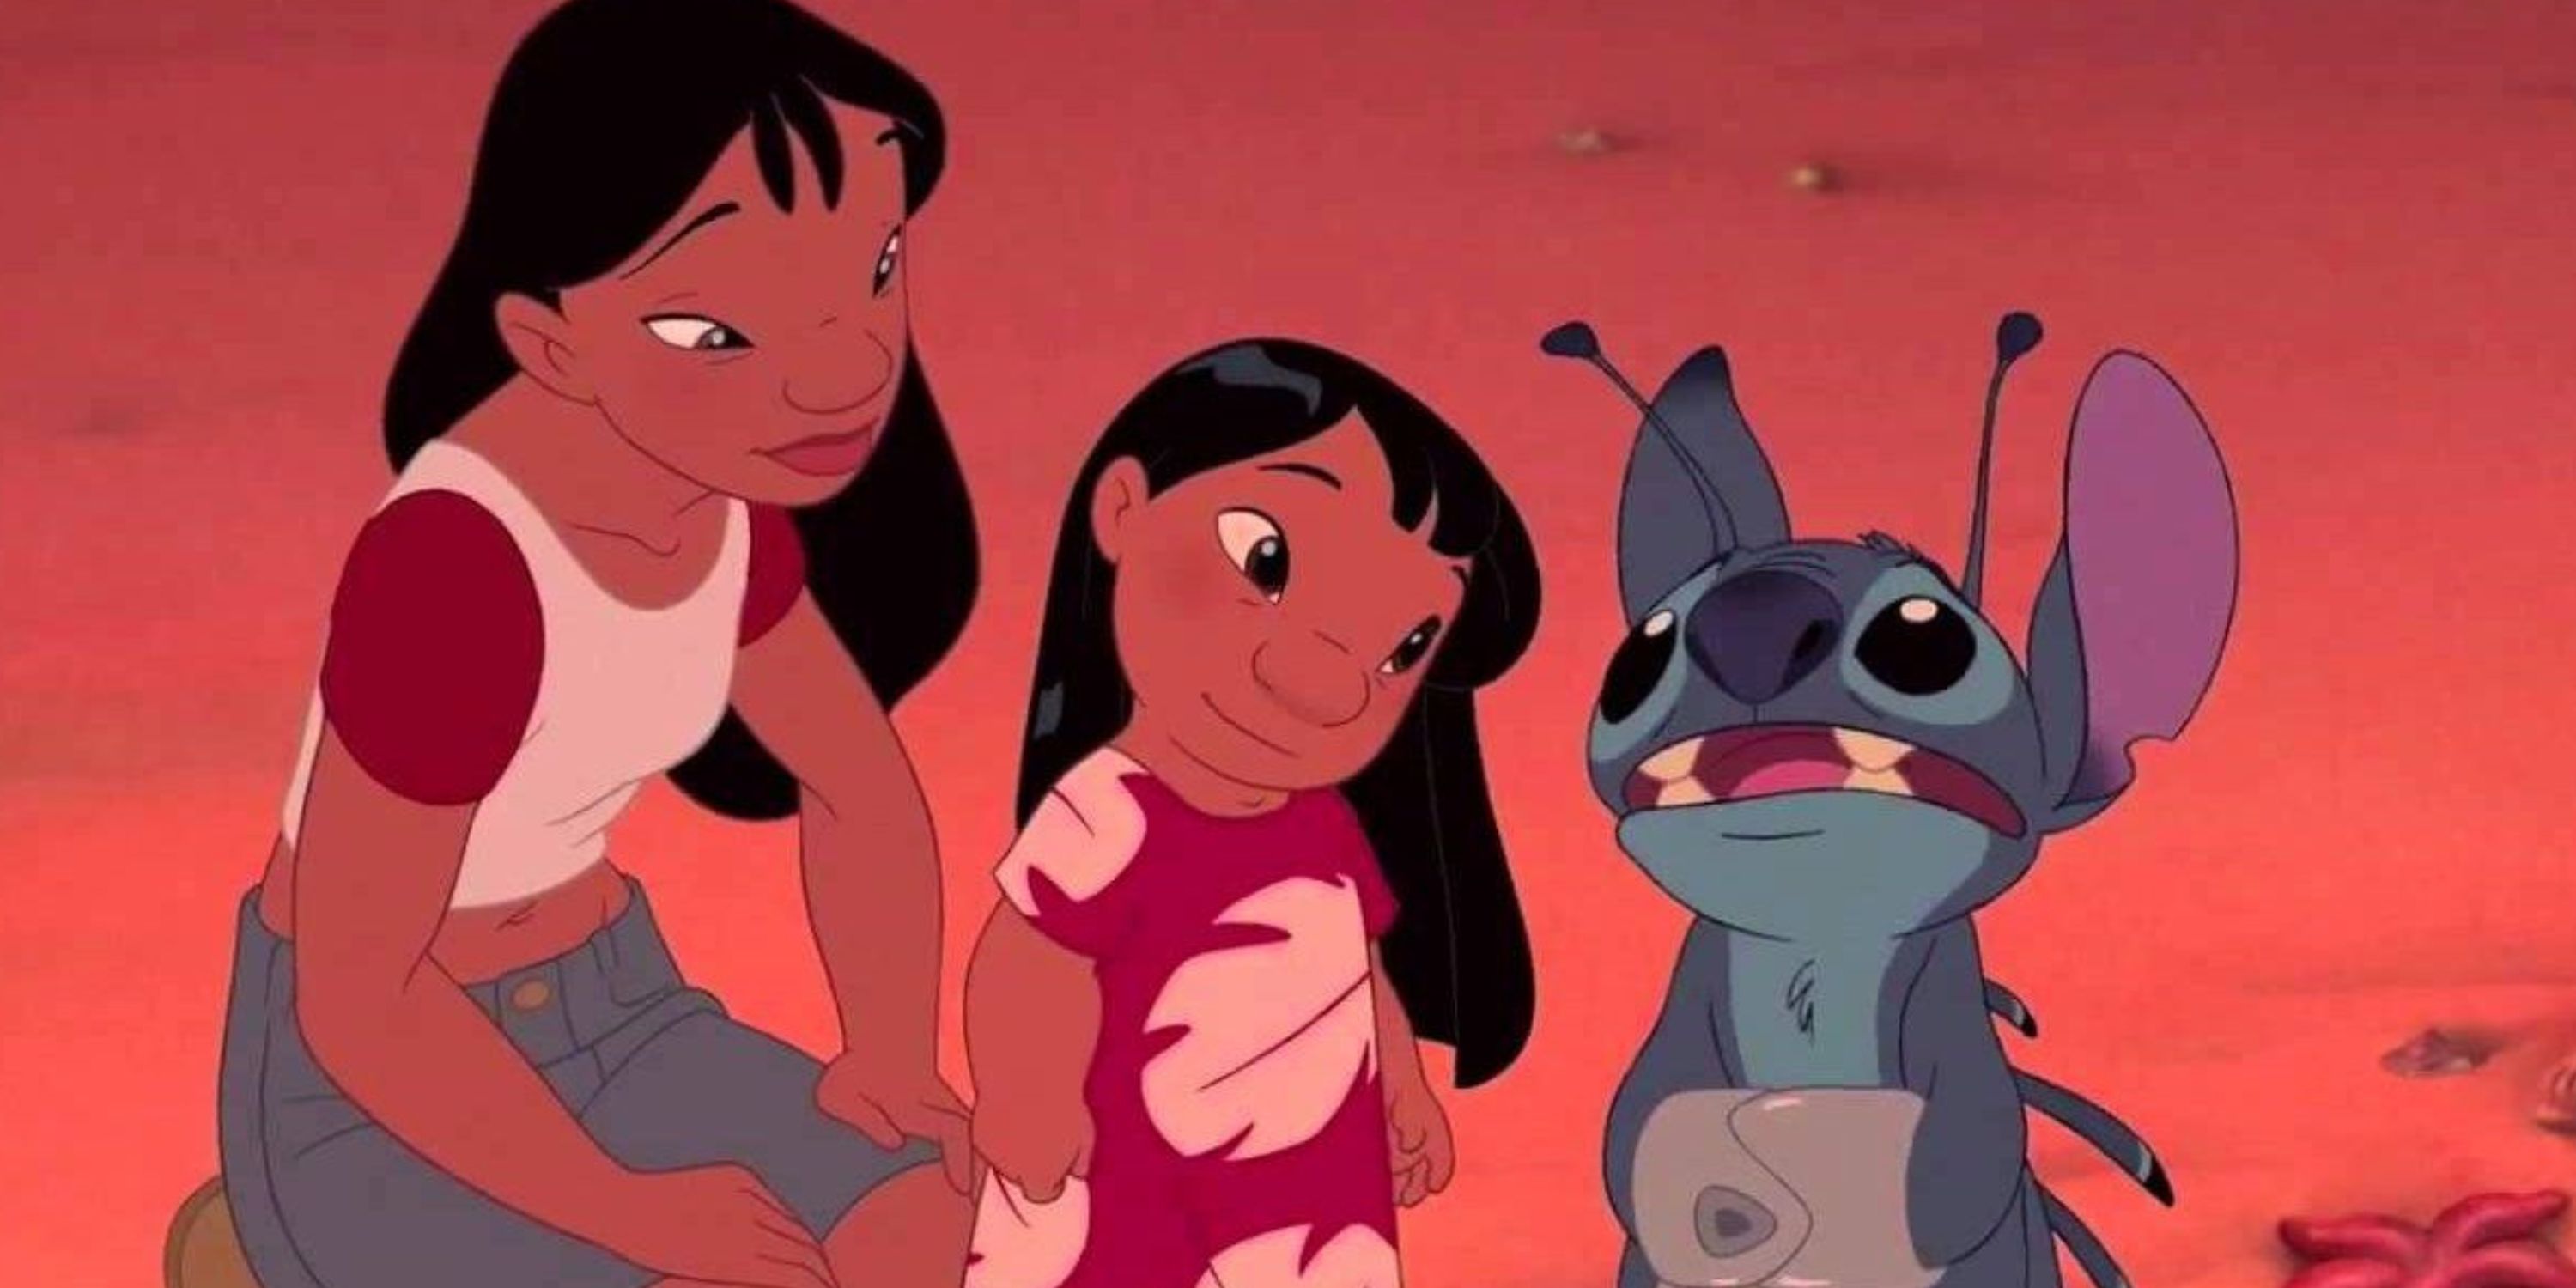 Nani and Lilo looking at Stitch as he talks at the end of Lilo and Stitch (2002)